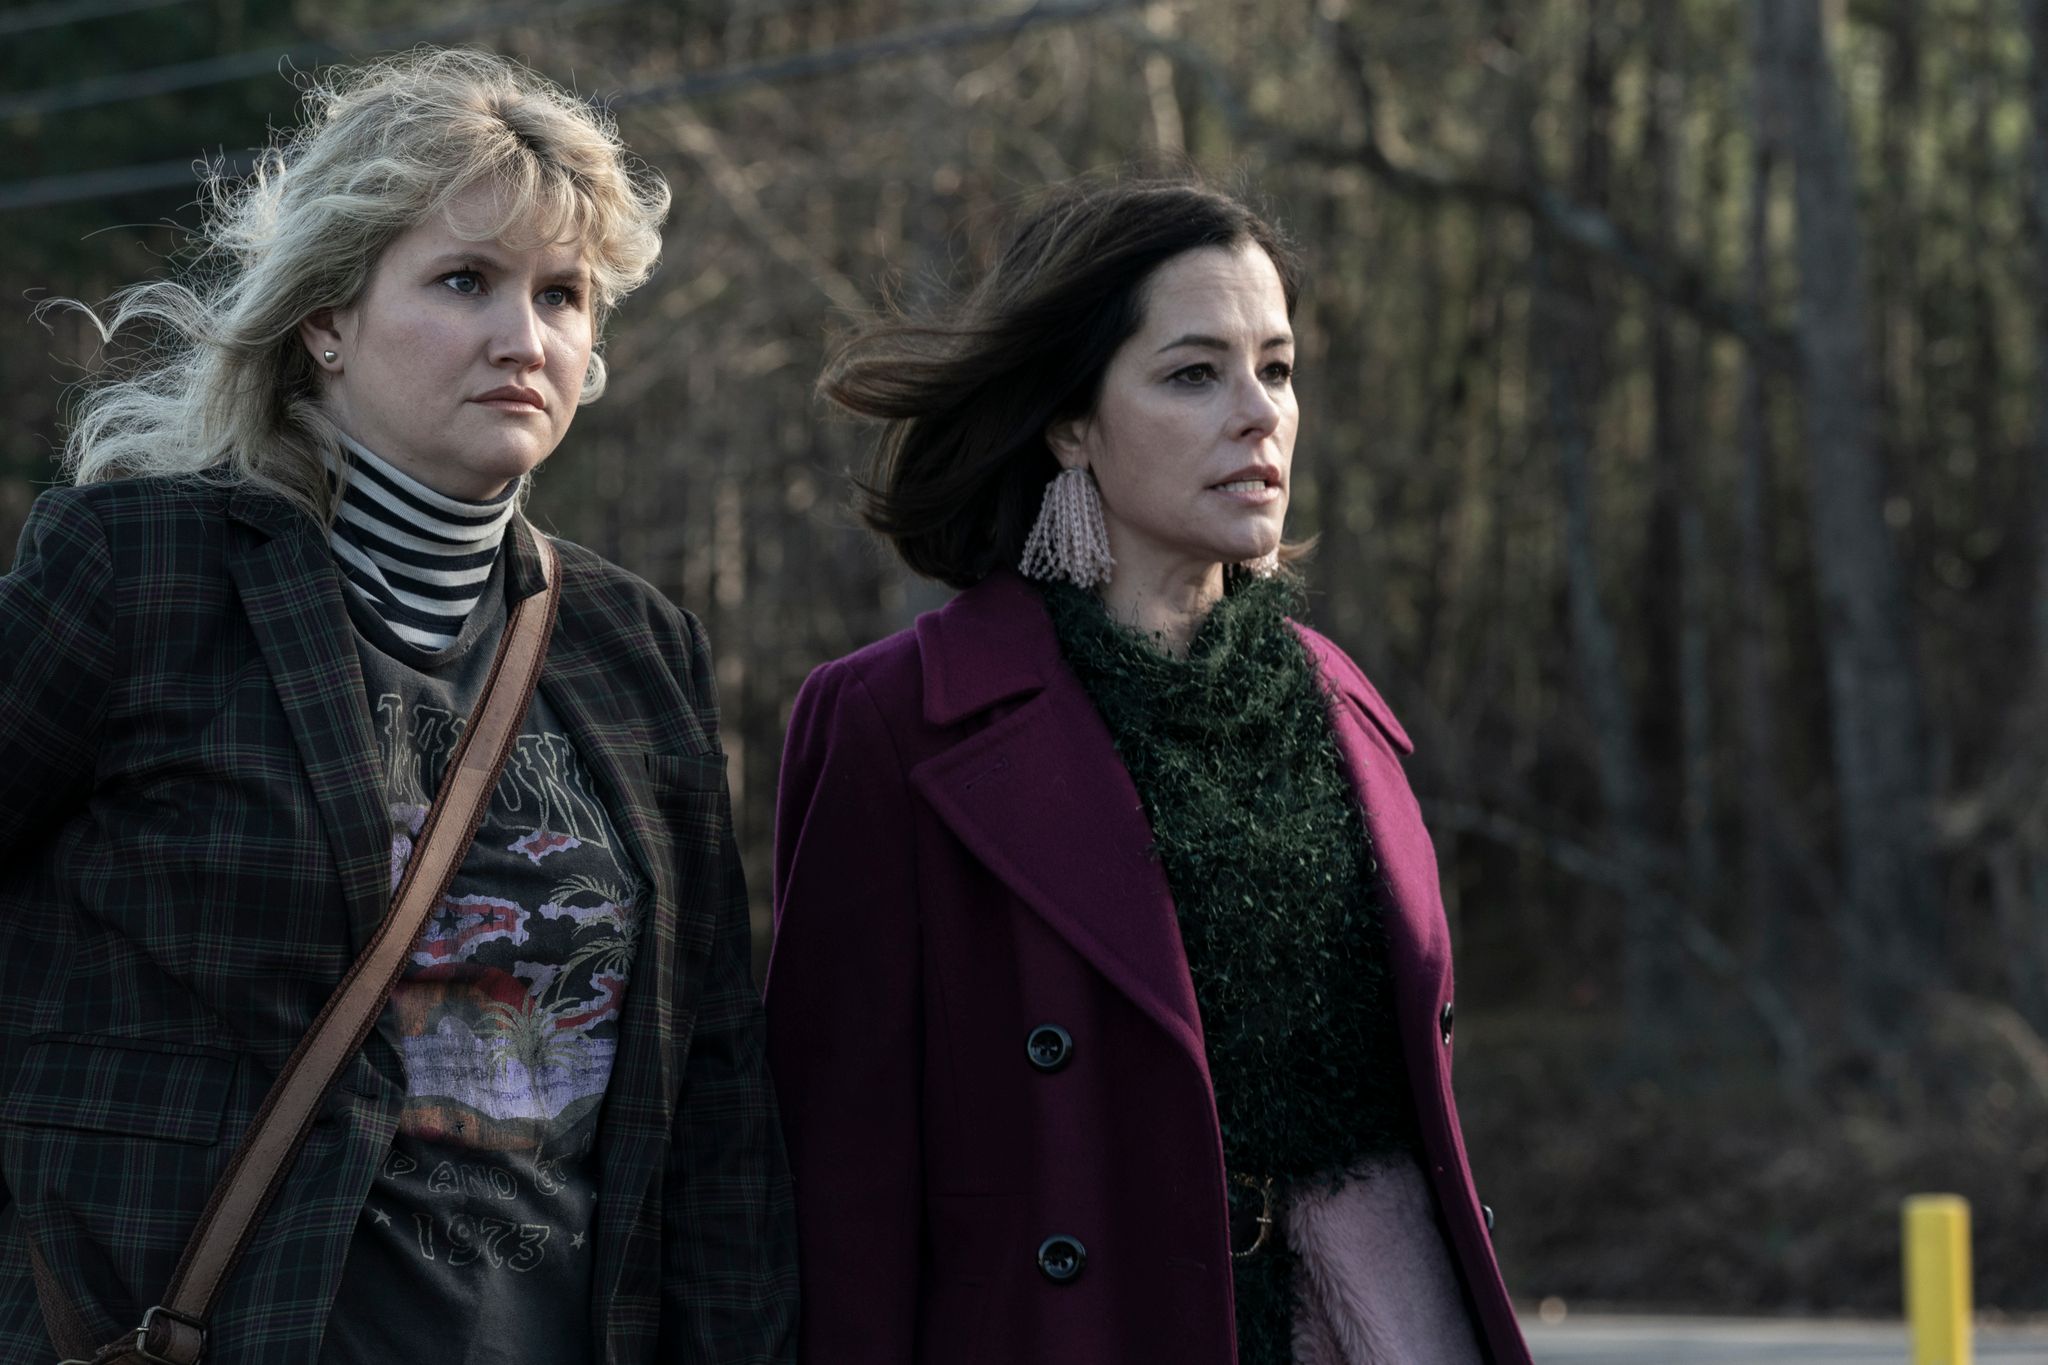 Jillian Bell as Gina and Parker Posey as Blair in character in Tales of the Walking Dead walking down a road in the forest